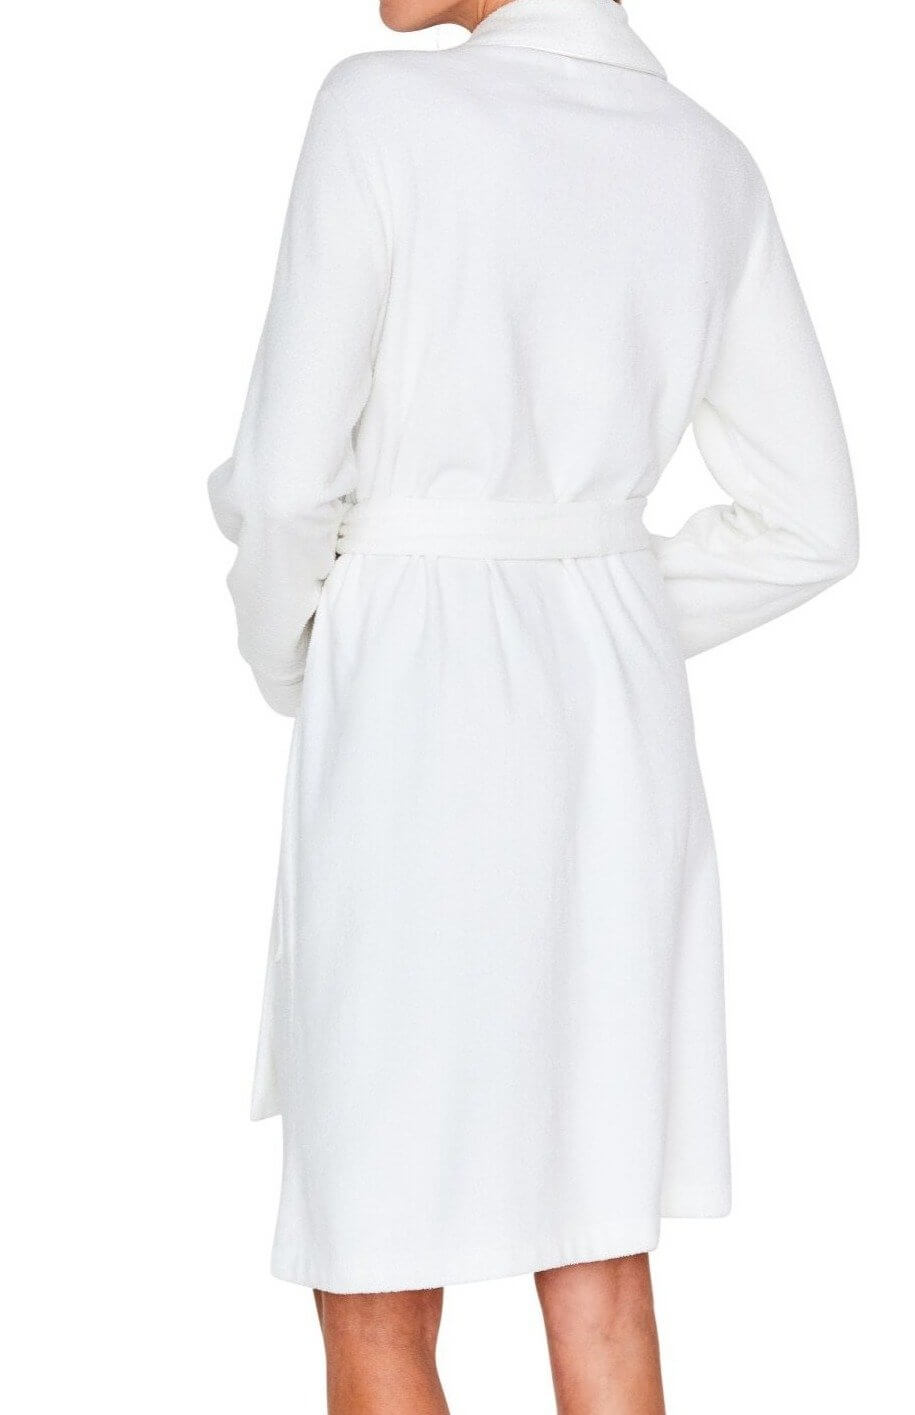 Marelle Theresa Long Sleeve Short Robe Color: White Size: XS, S, M, L at Petticoat Lane  Greenwich, CT